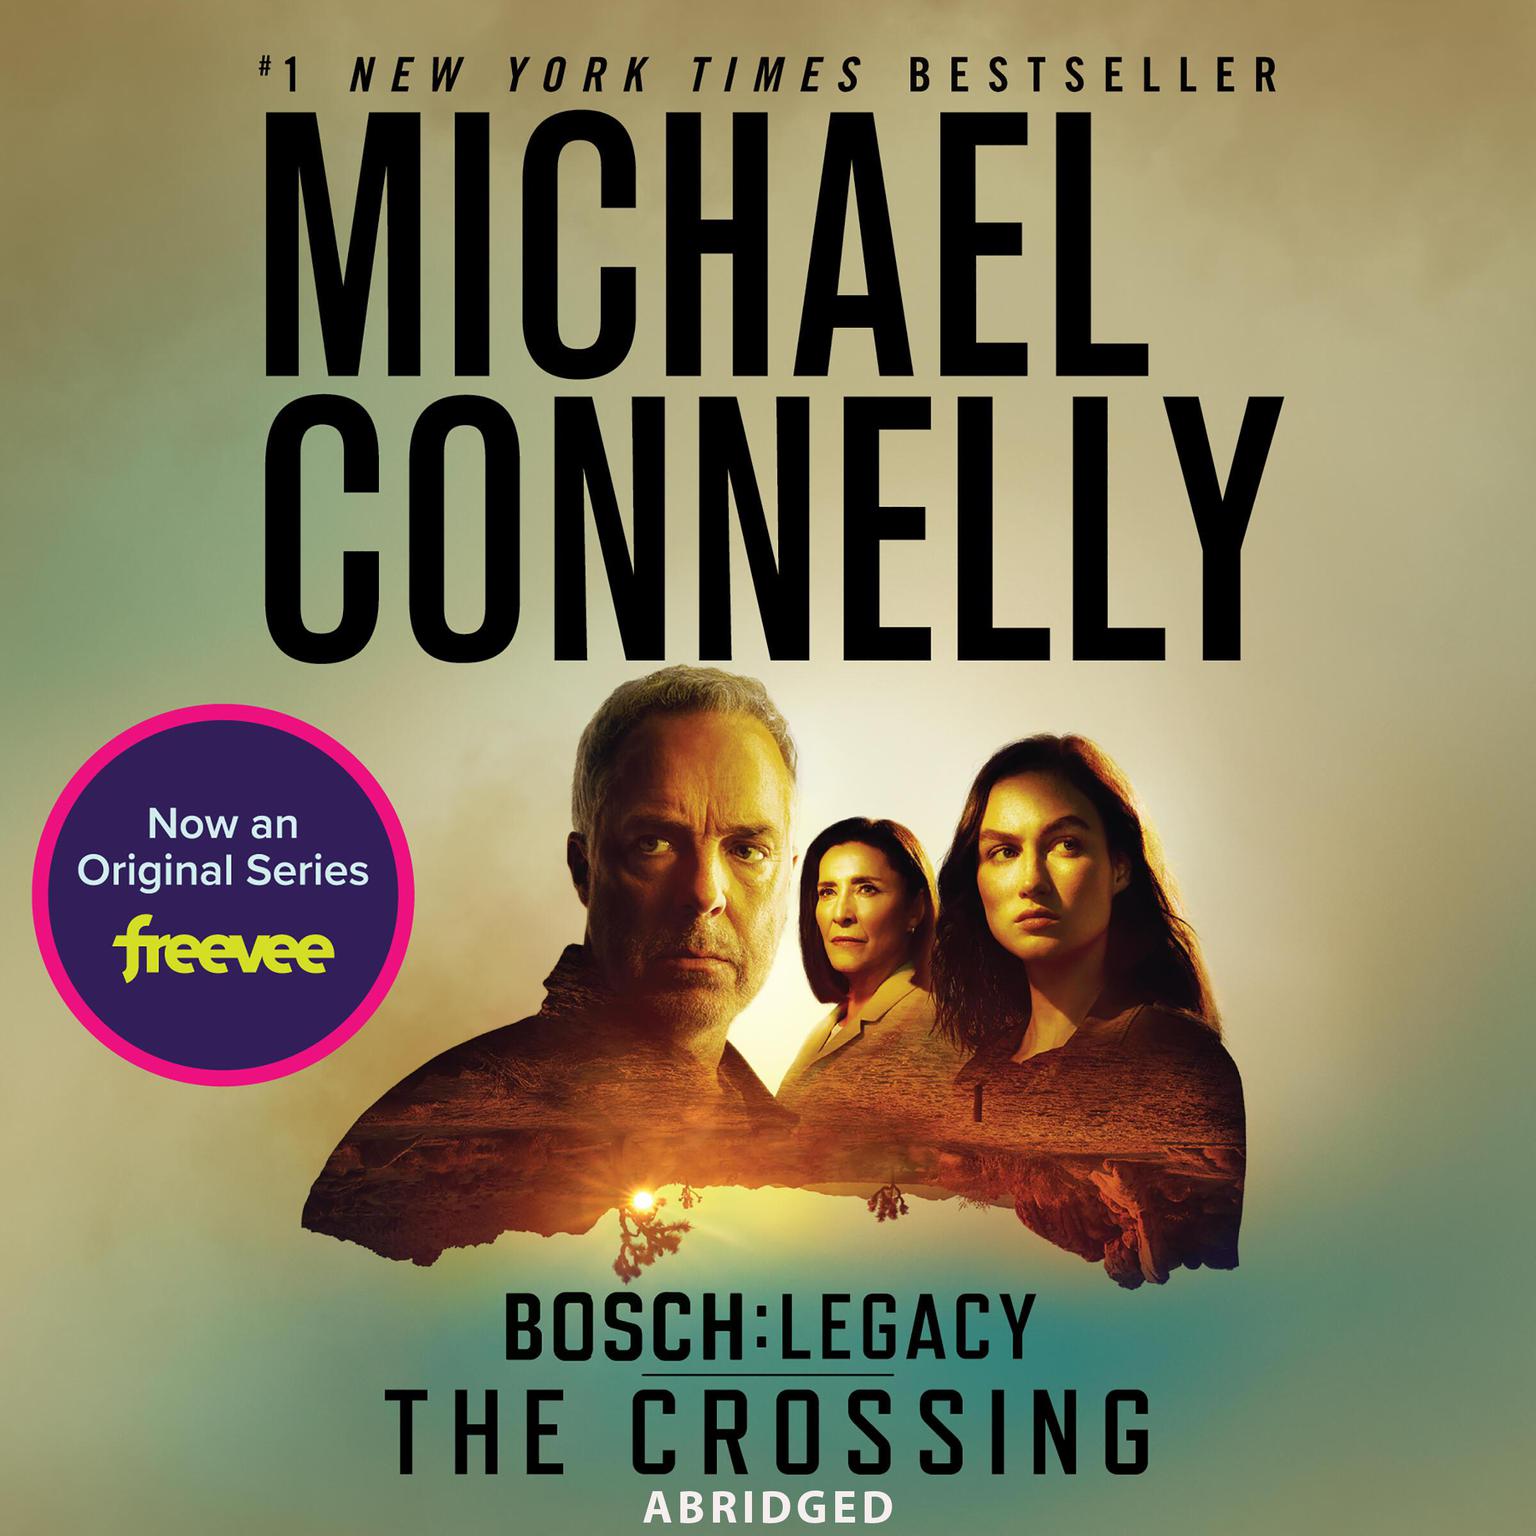 The Crossing (Abridged) Audiobook, by Michael Connelly